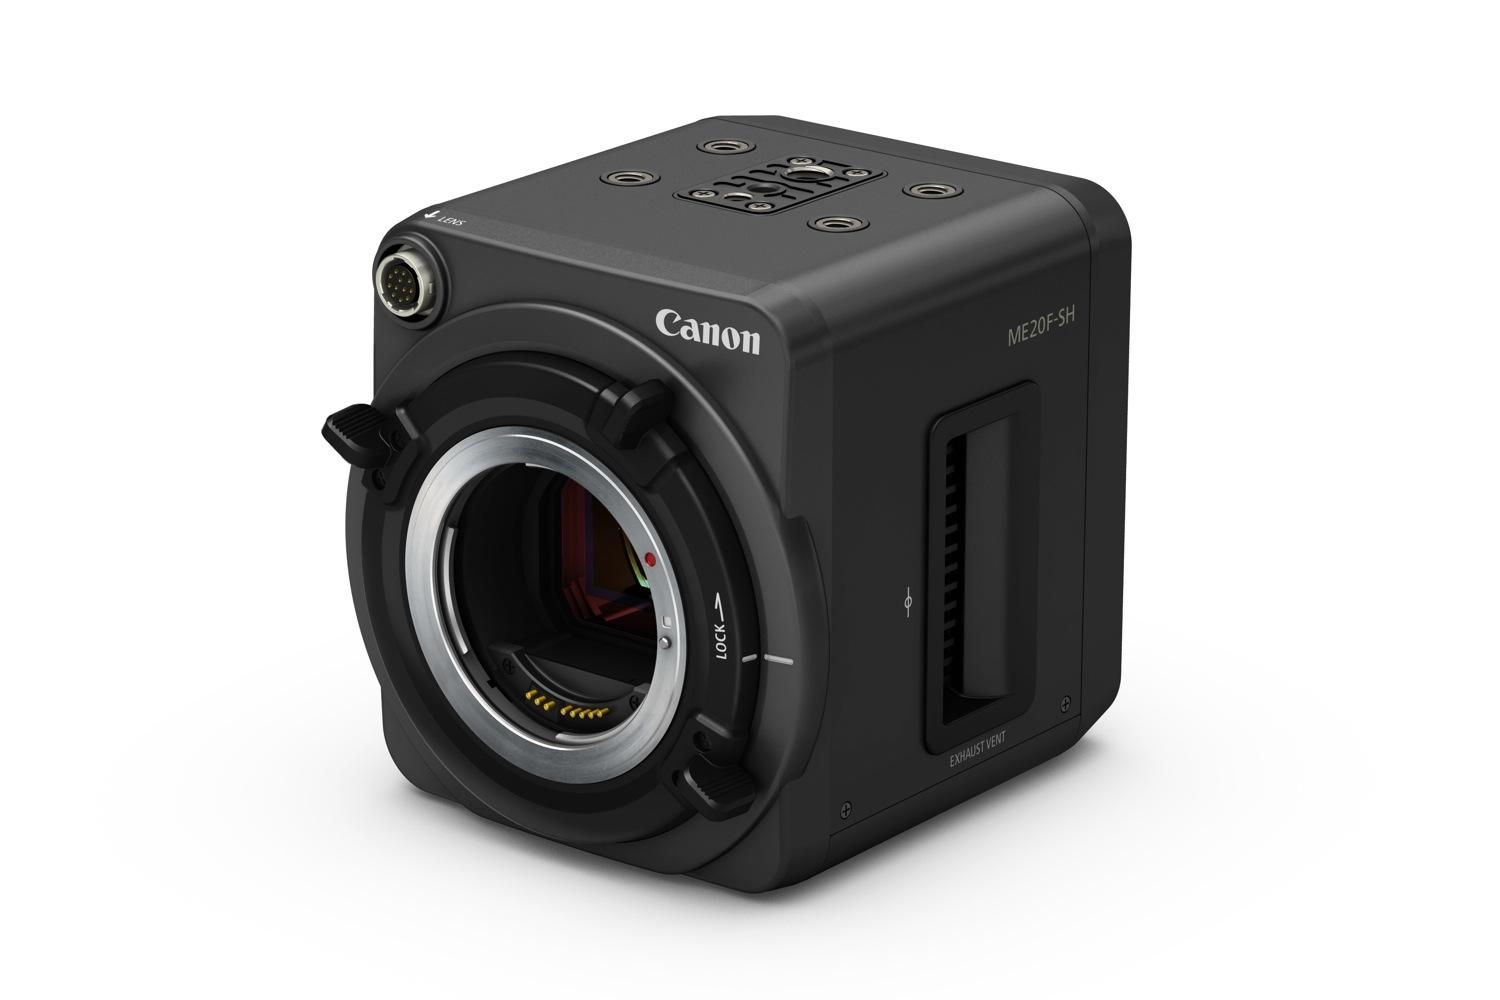 canons new video camera sees in the dark better than your eyes can canon me20f sh 3